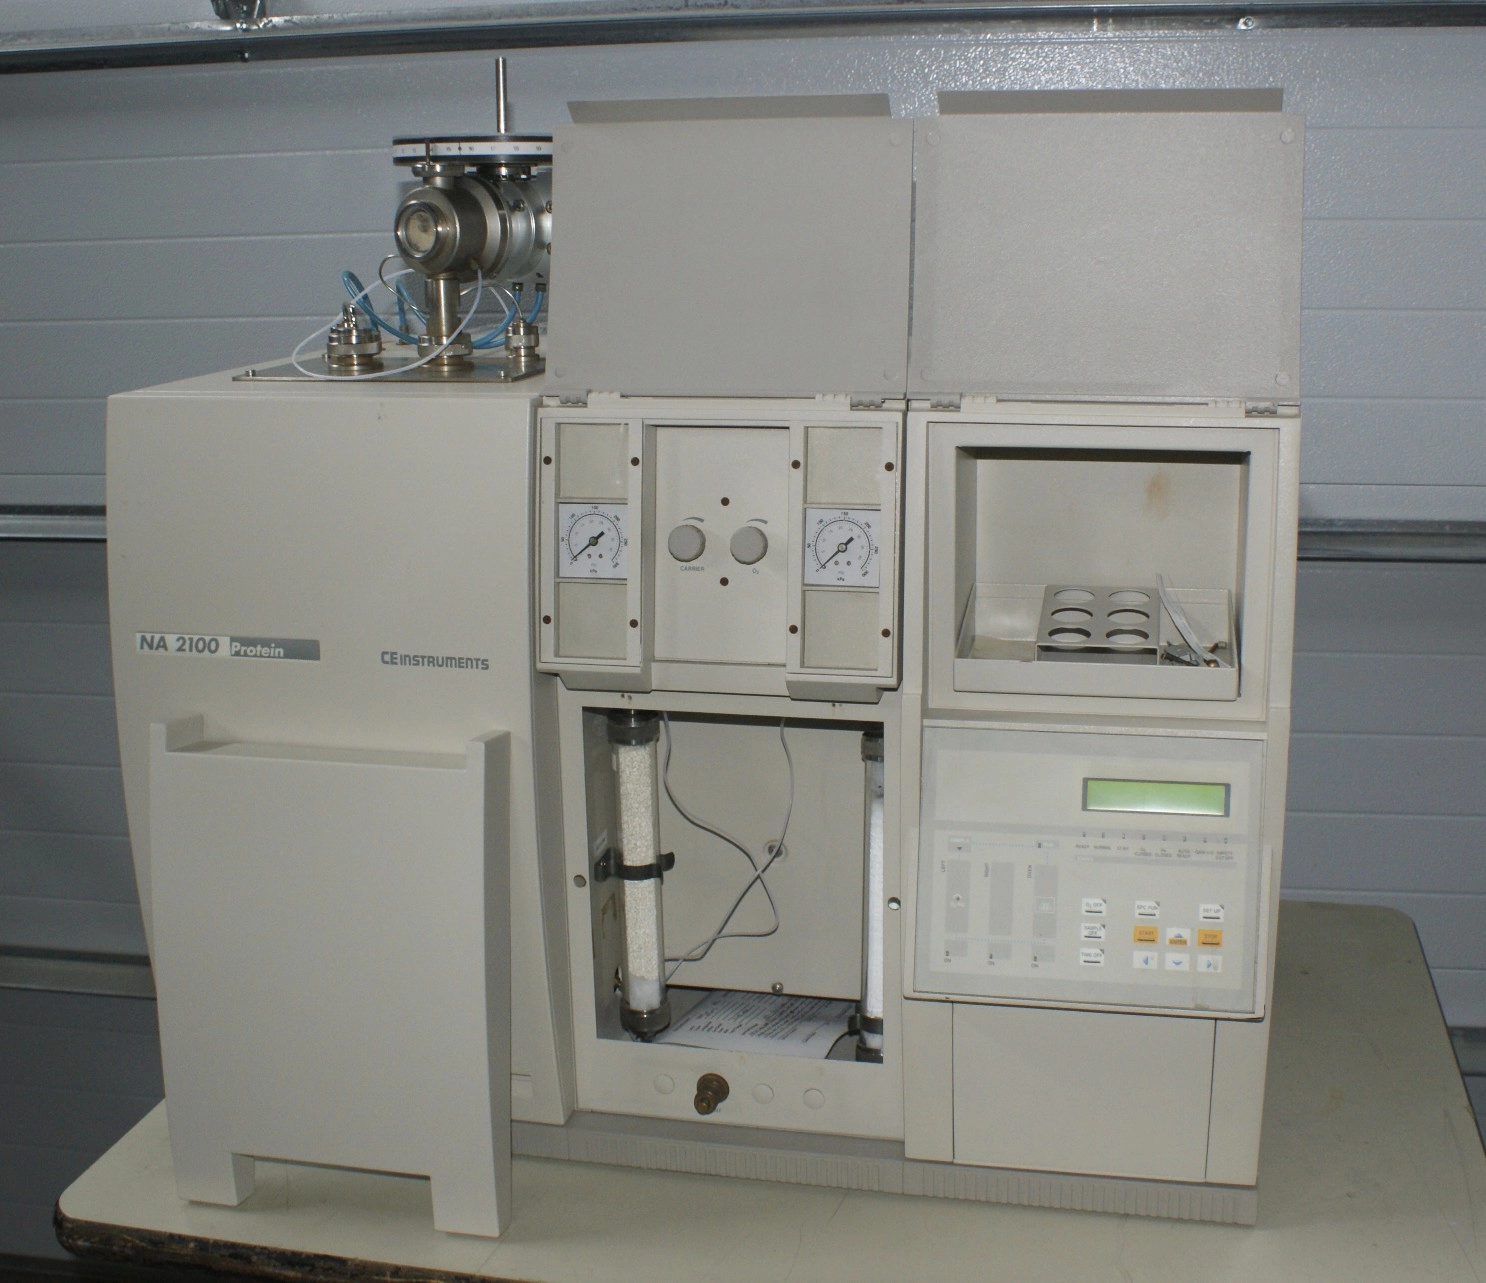 CE Instruments NA 2100 Protein Analyser CE Instruments EA / NA 1110 FISONS EA/NA 1110 WE Instruments Protein Analyzer Fisons